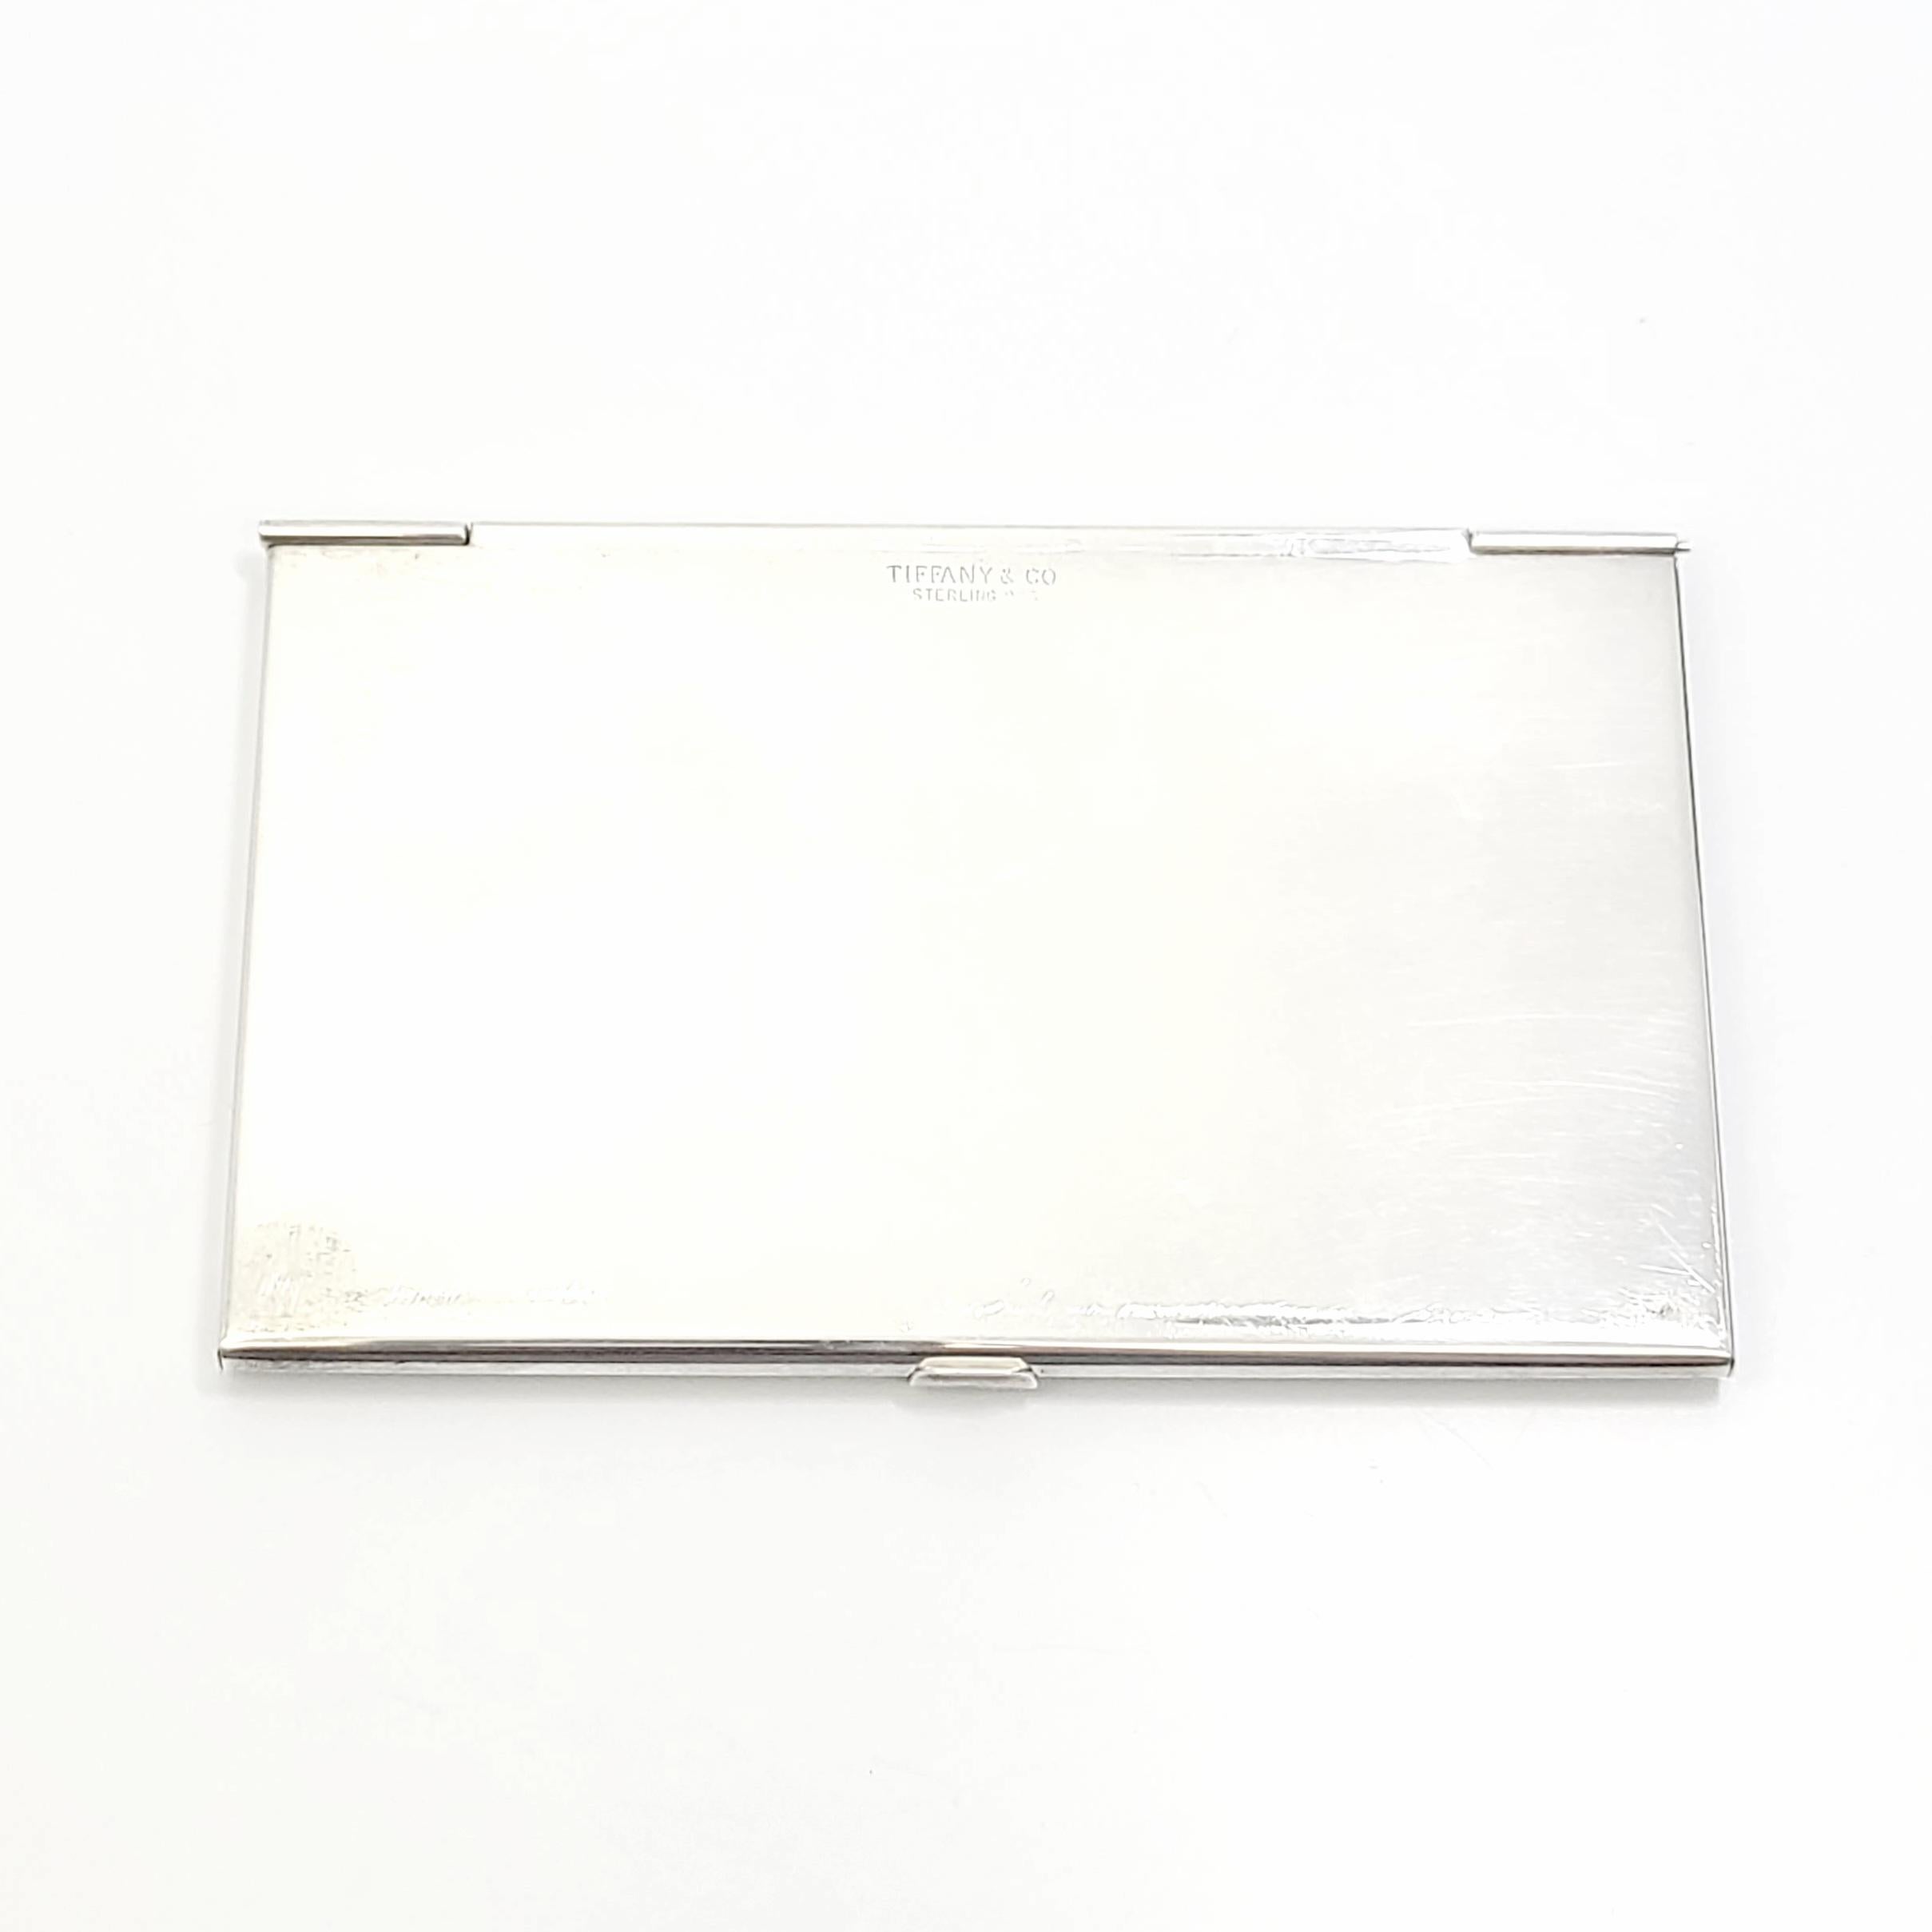 Sterling silver card case by Tiffany & Co.

Monogram appears to be PCS.

This simple and elegant piece features a smooth polished finish with a monogram on the front center. Can hold credit cards or business cards.

Measures 2 1/4